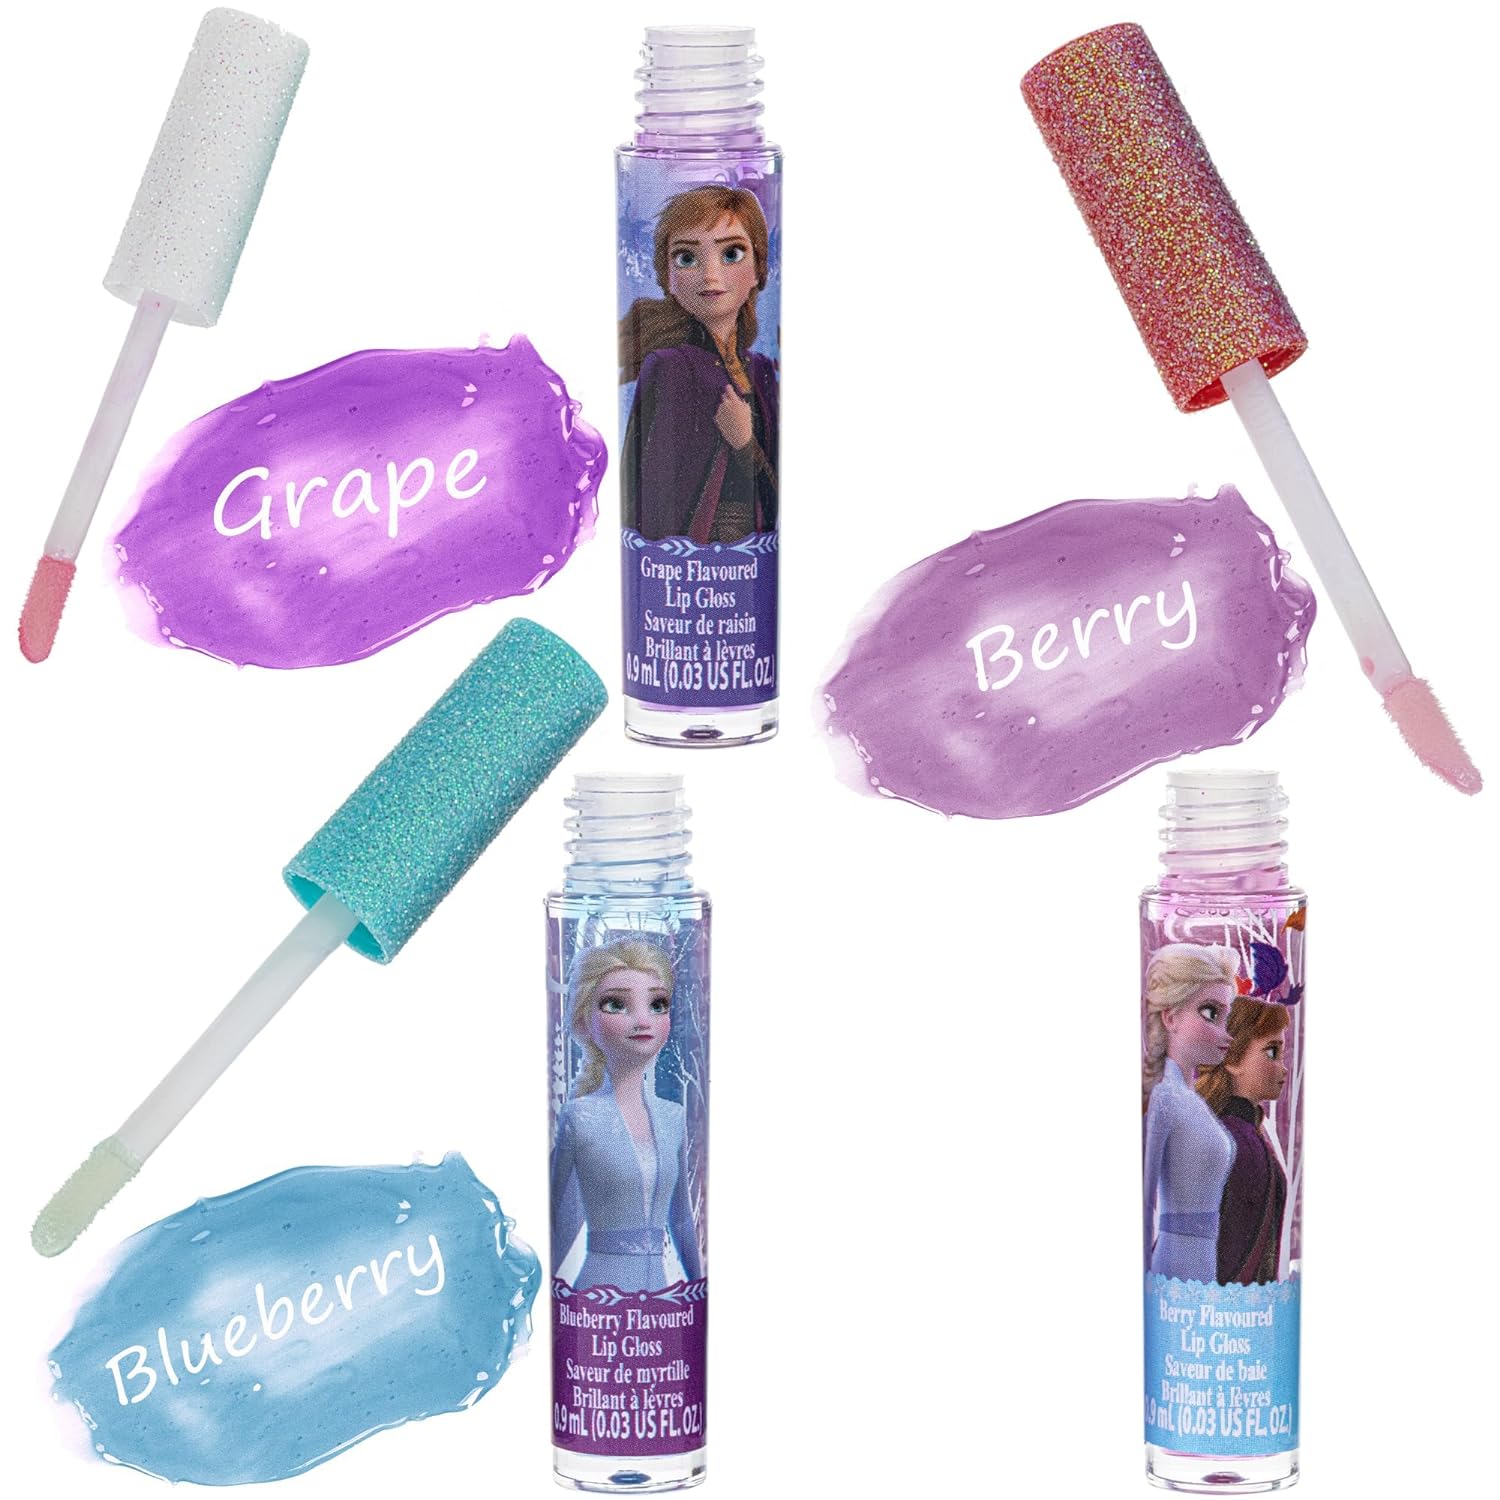 Townley Girl Disney Frozen Plant Based Vegan 7 PC Flavored Lip Gloss Set For Girls – Ideal for Sleepovers, Makeovers, Party Favors and Birthday Gifts! - Age: 3+